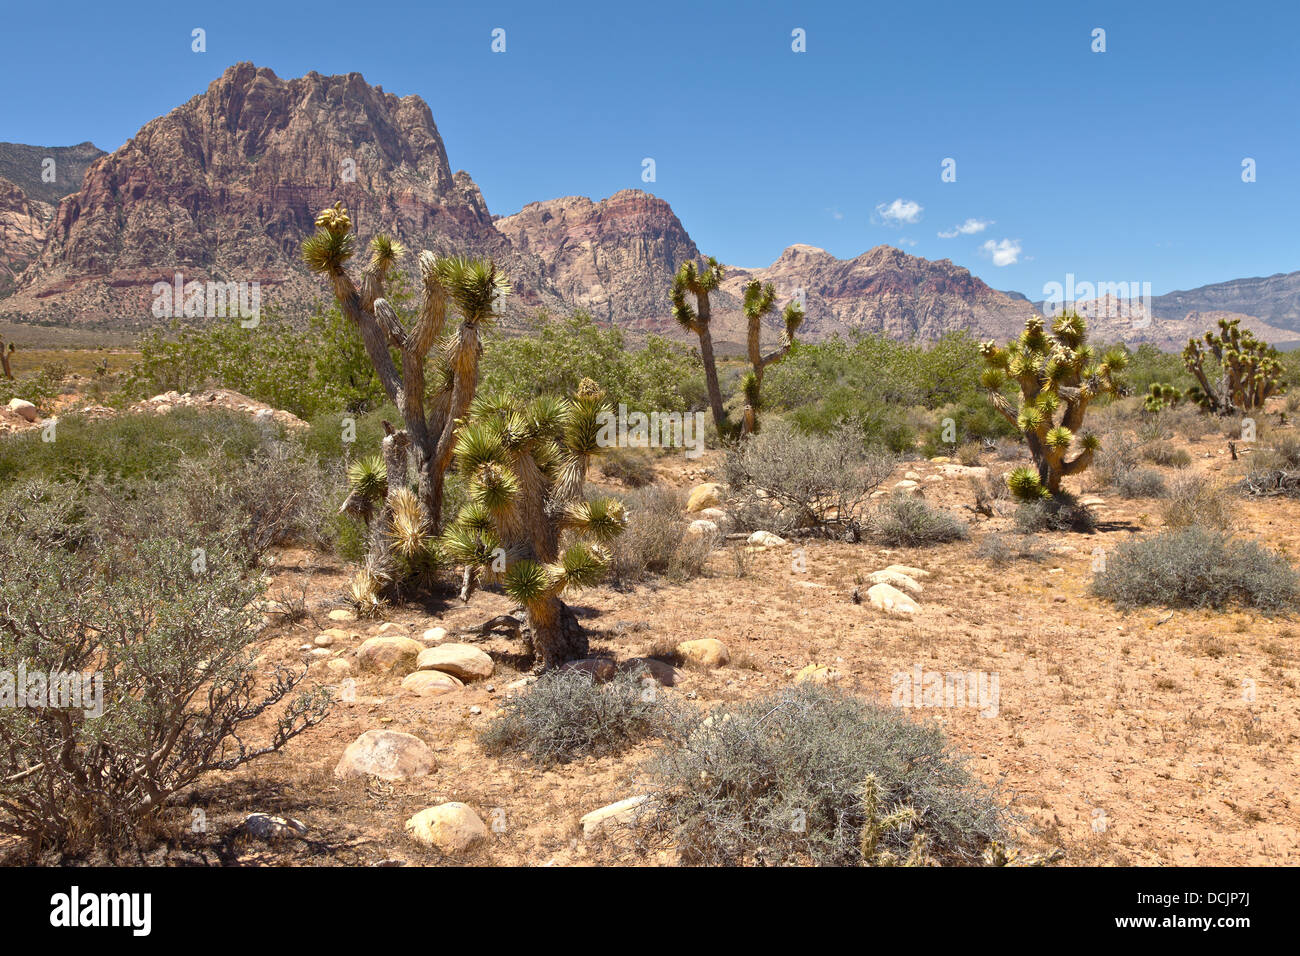 Red Rock Canyon valley and desert plants a dry and hot surrounding. Stock Photo